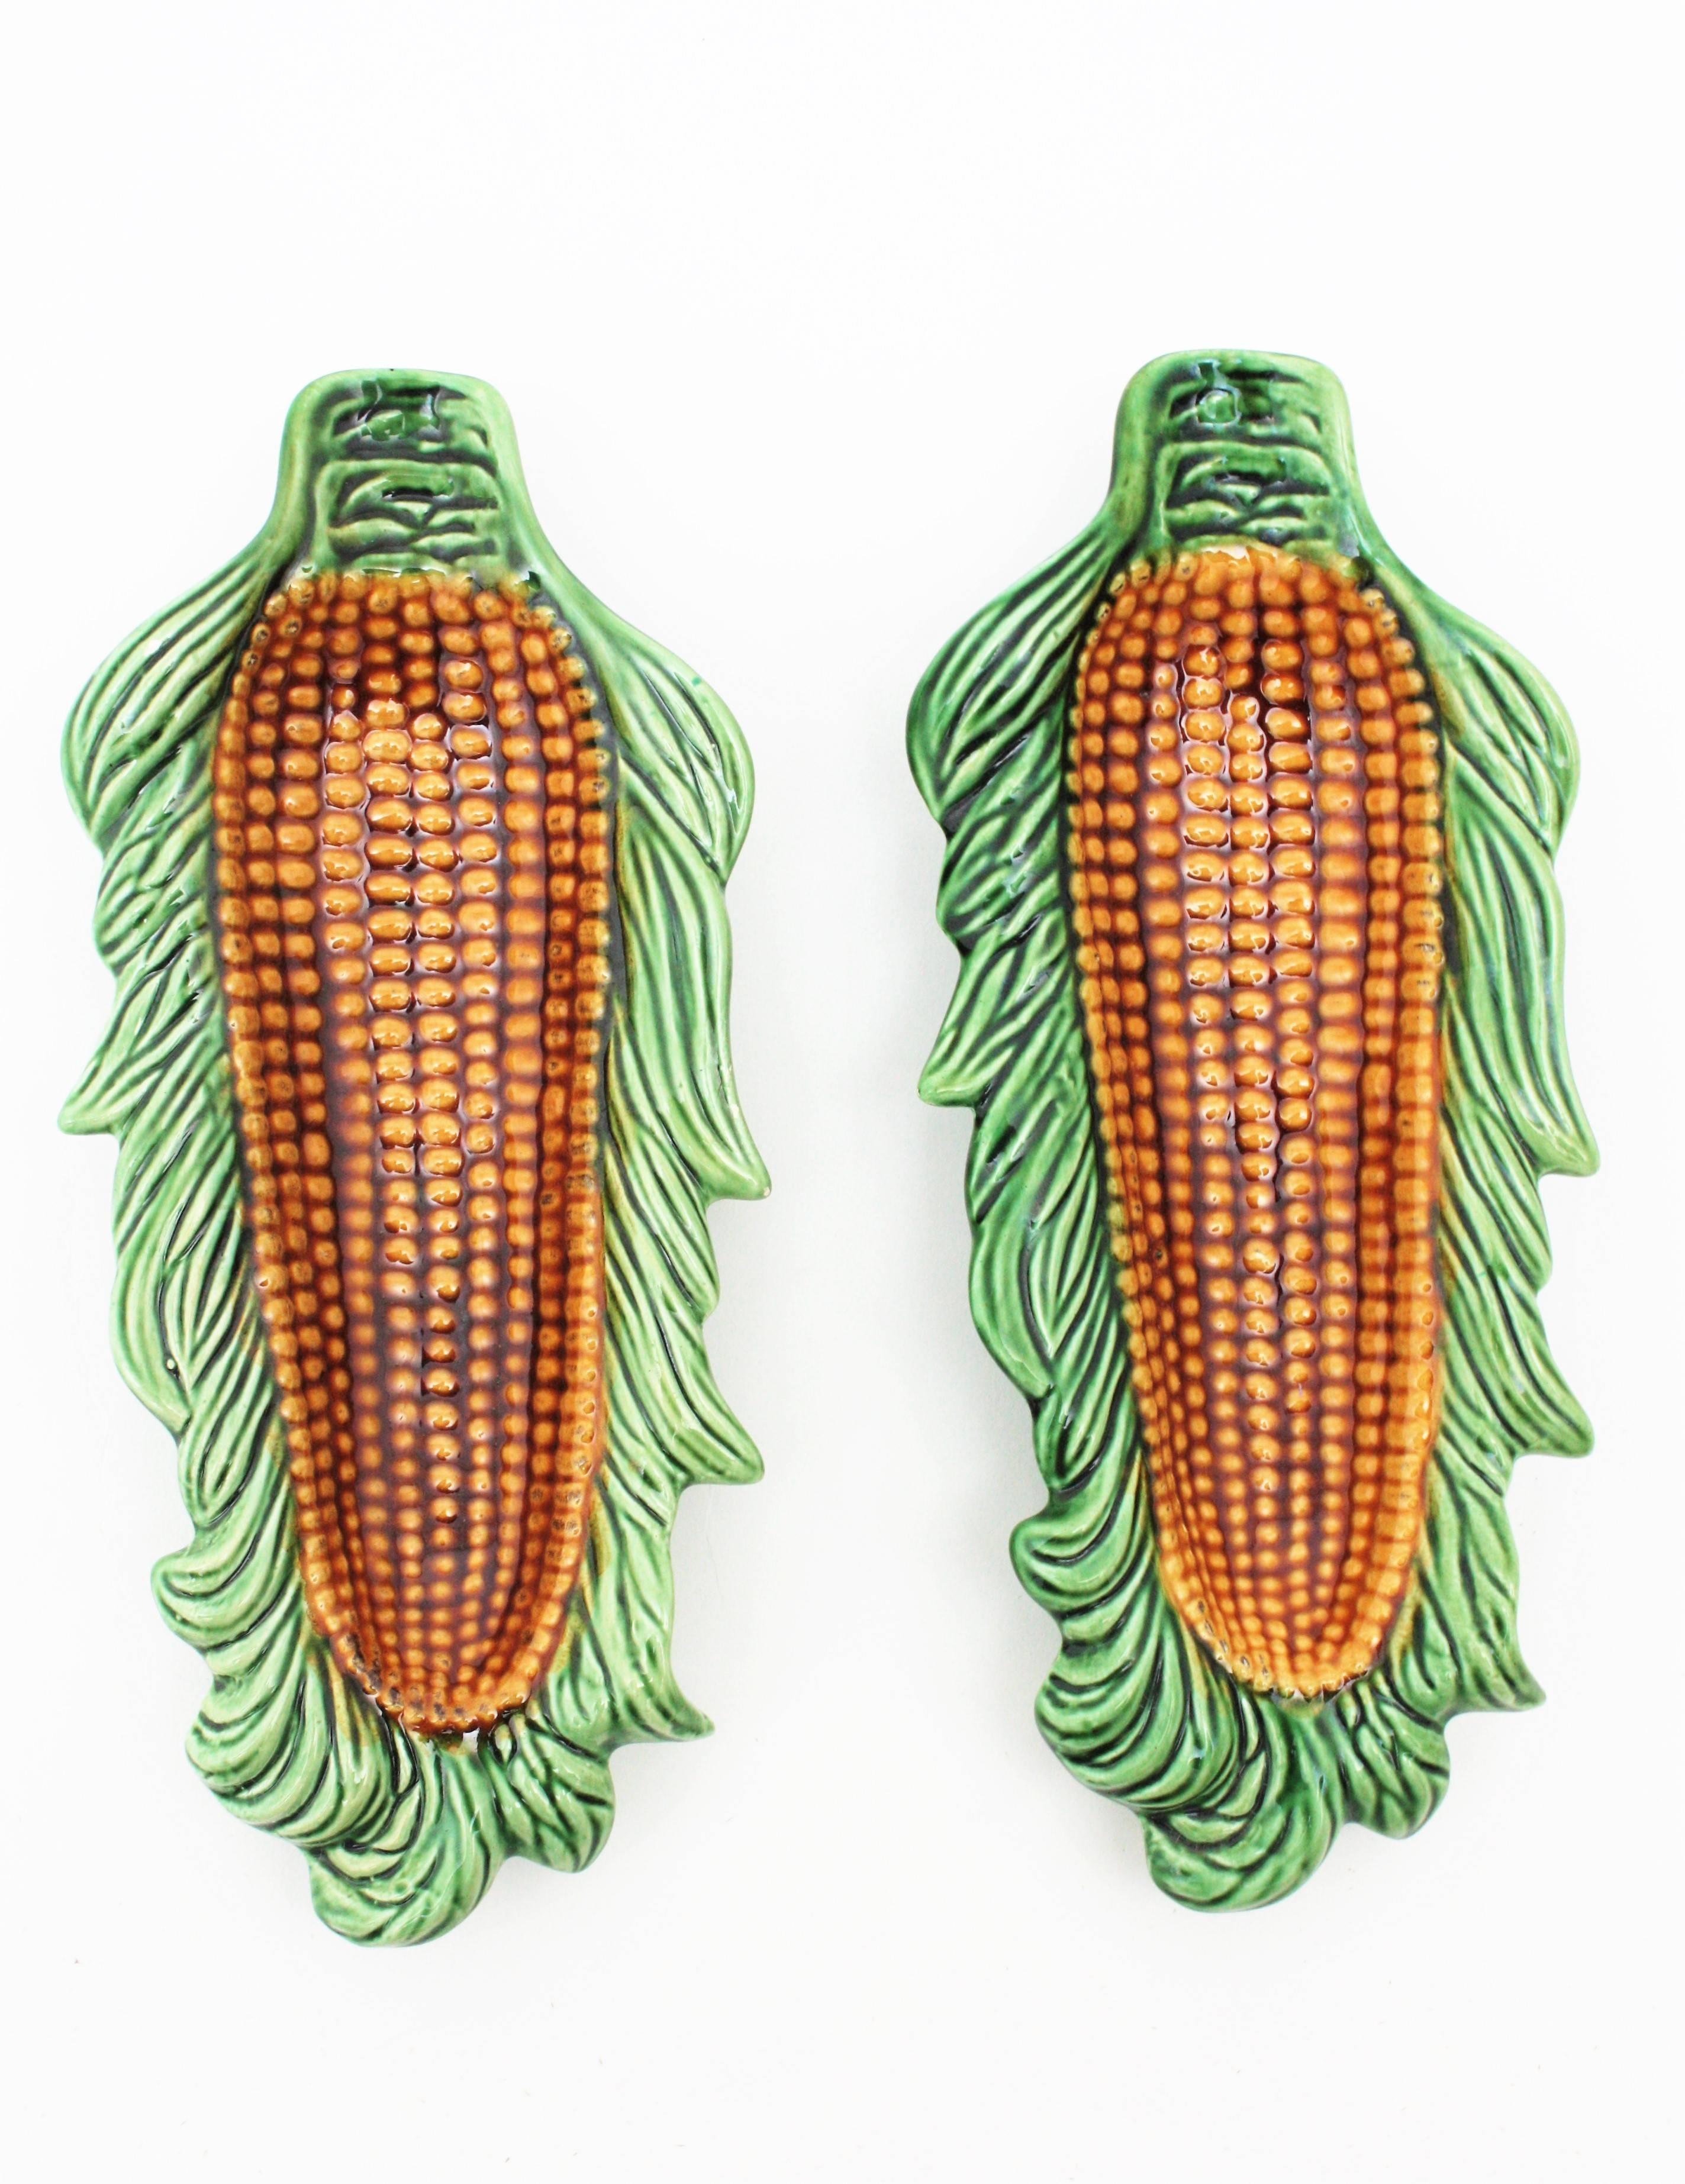 A Cool Pair of Green and Yellow Majolica Glazed Ceramic Corn On The Cob Plates. Portugal, 1950s-1960s.
Perfect for the daily use of for decorative purposes.
Excellent condition.
Measures: 25,5 cm W x 11 cm D x 4 cm H

On sale as a set.